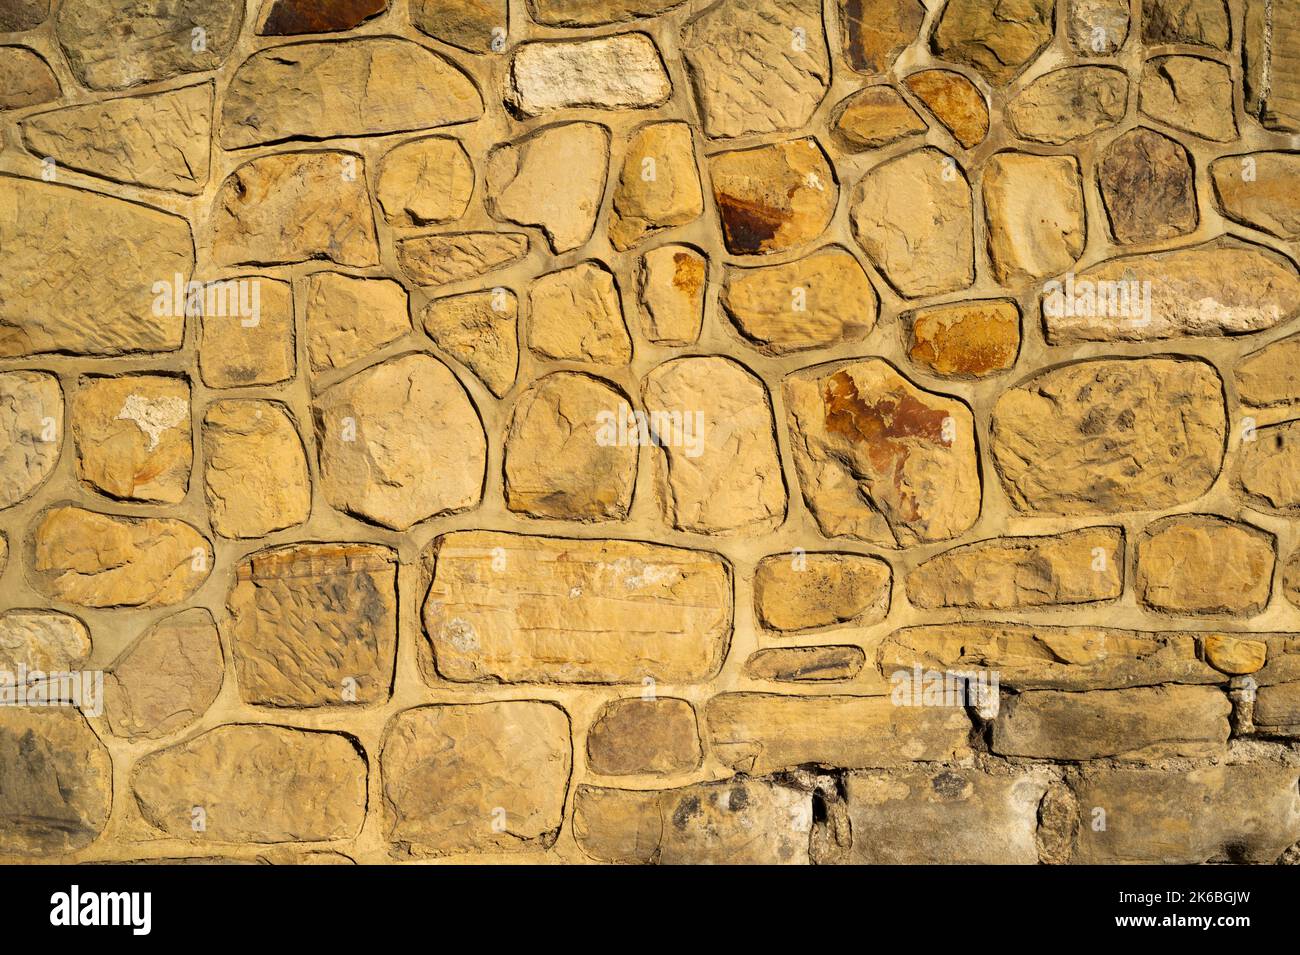 Natural Sandstone Stone Wall Texture Background with Fresh Mortar. Different Sized Uncut Large Stones Stock Photo